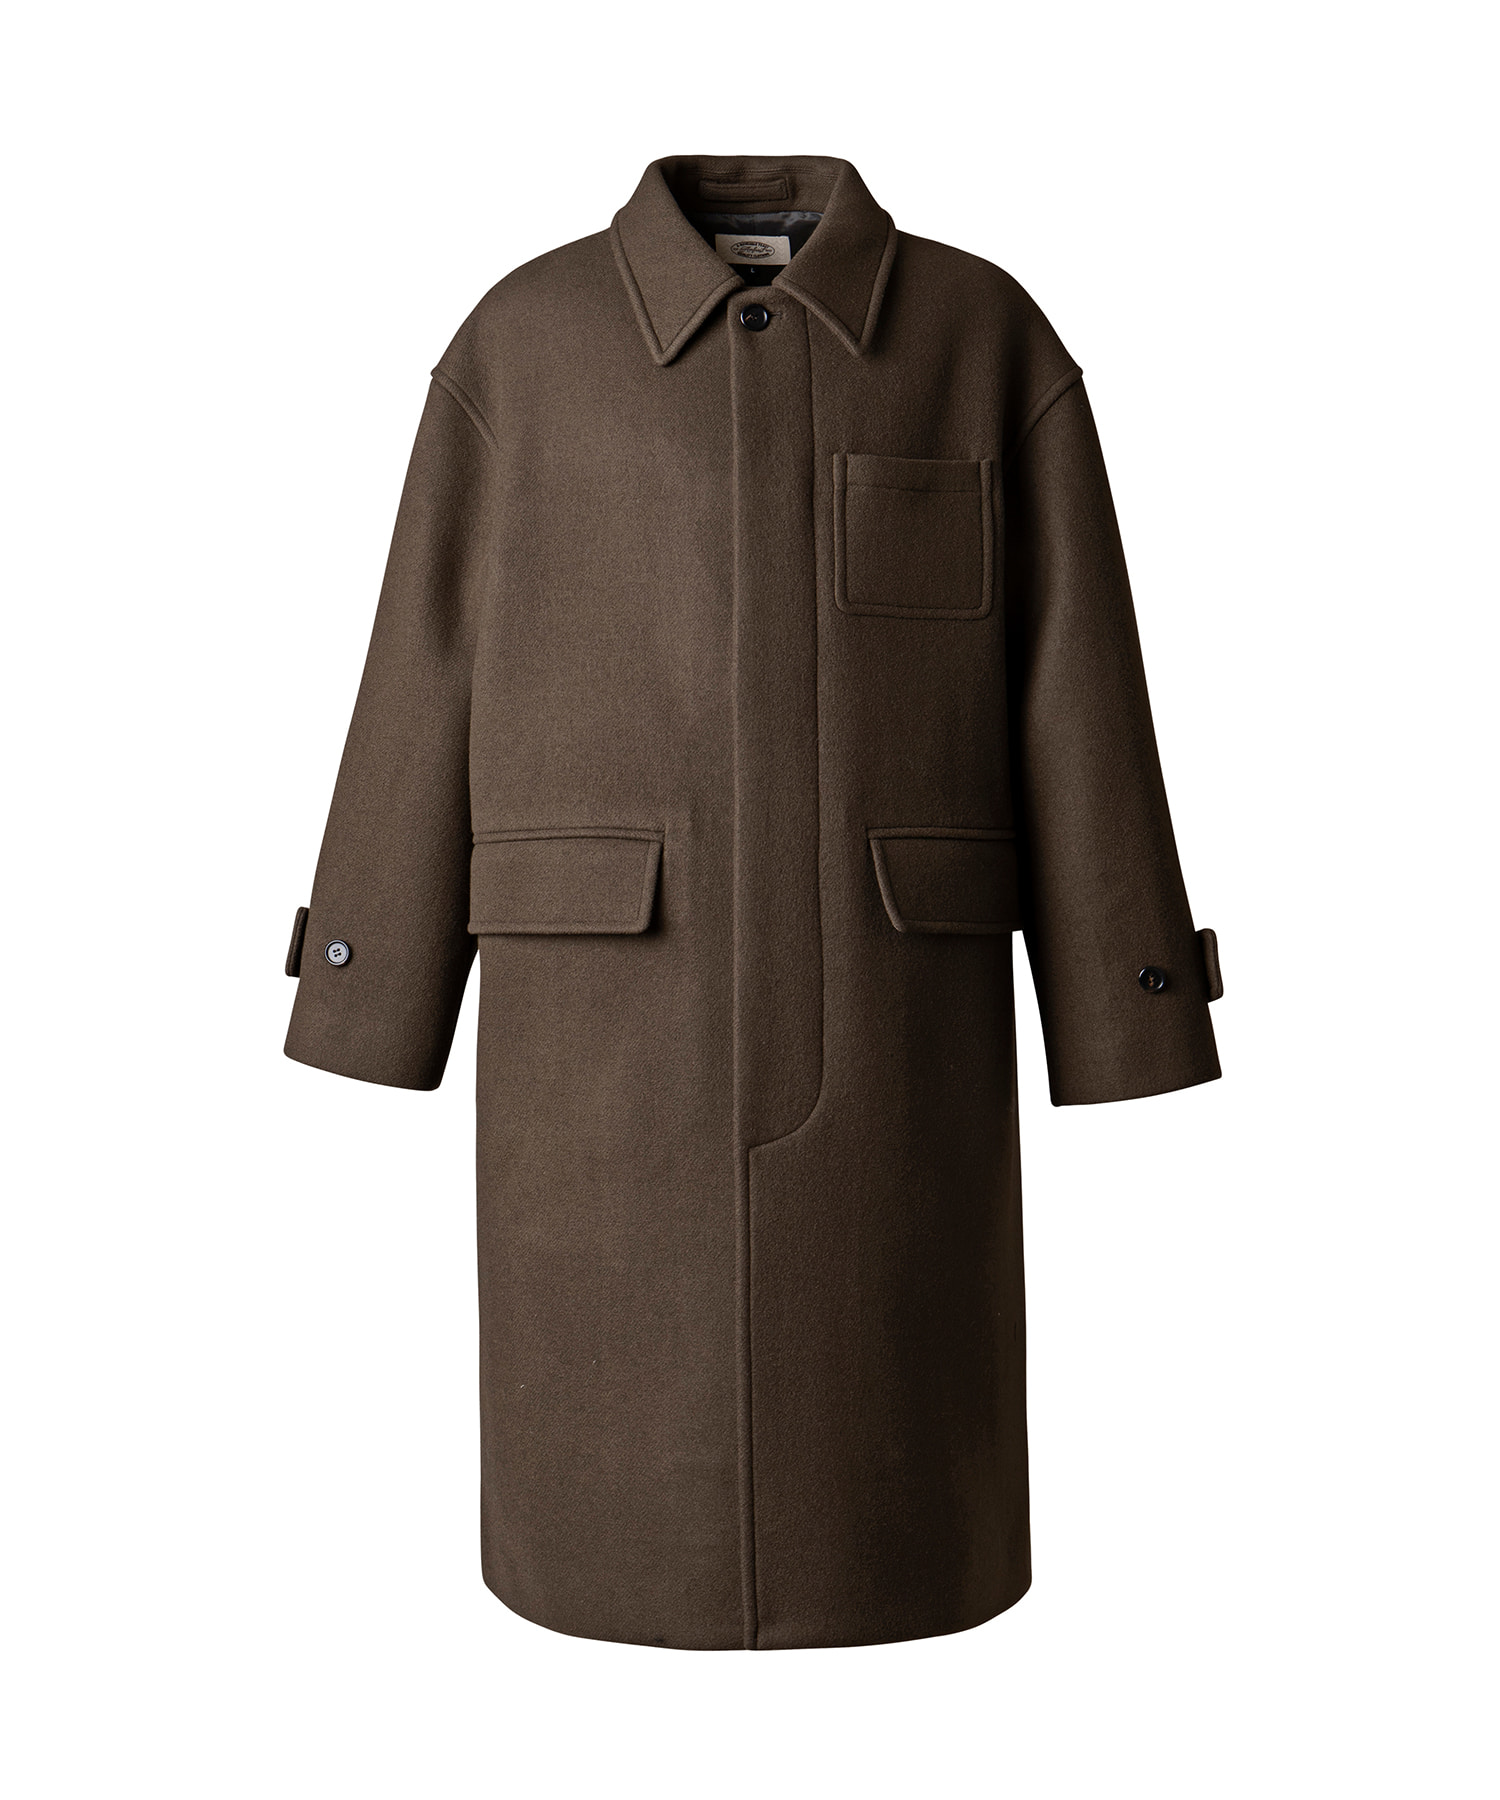 WORKERS SOUTIEN COLLAR COAT OLIVEAMFEAST(암피스트)